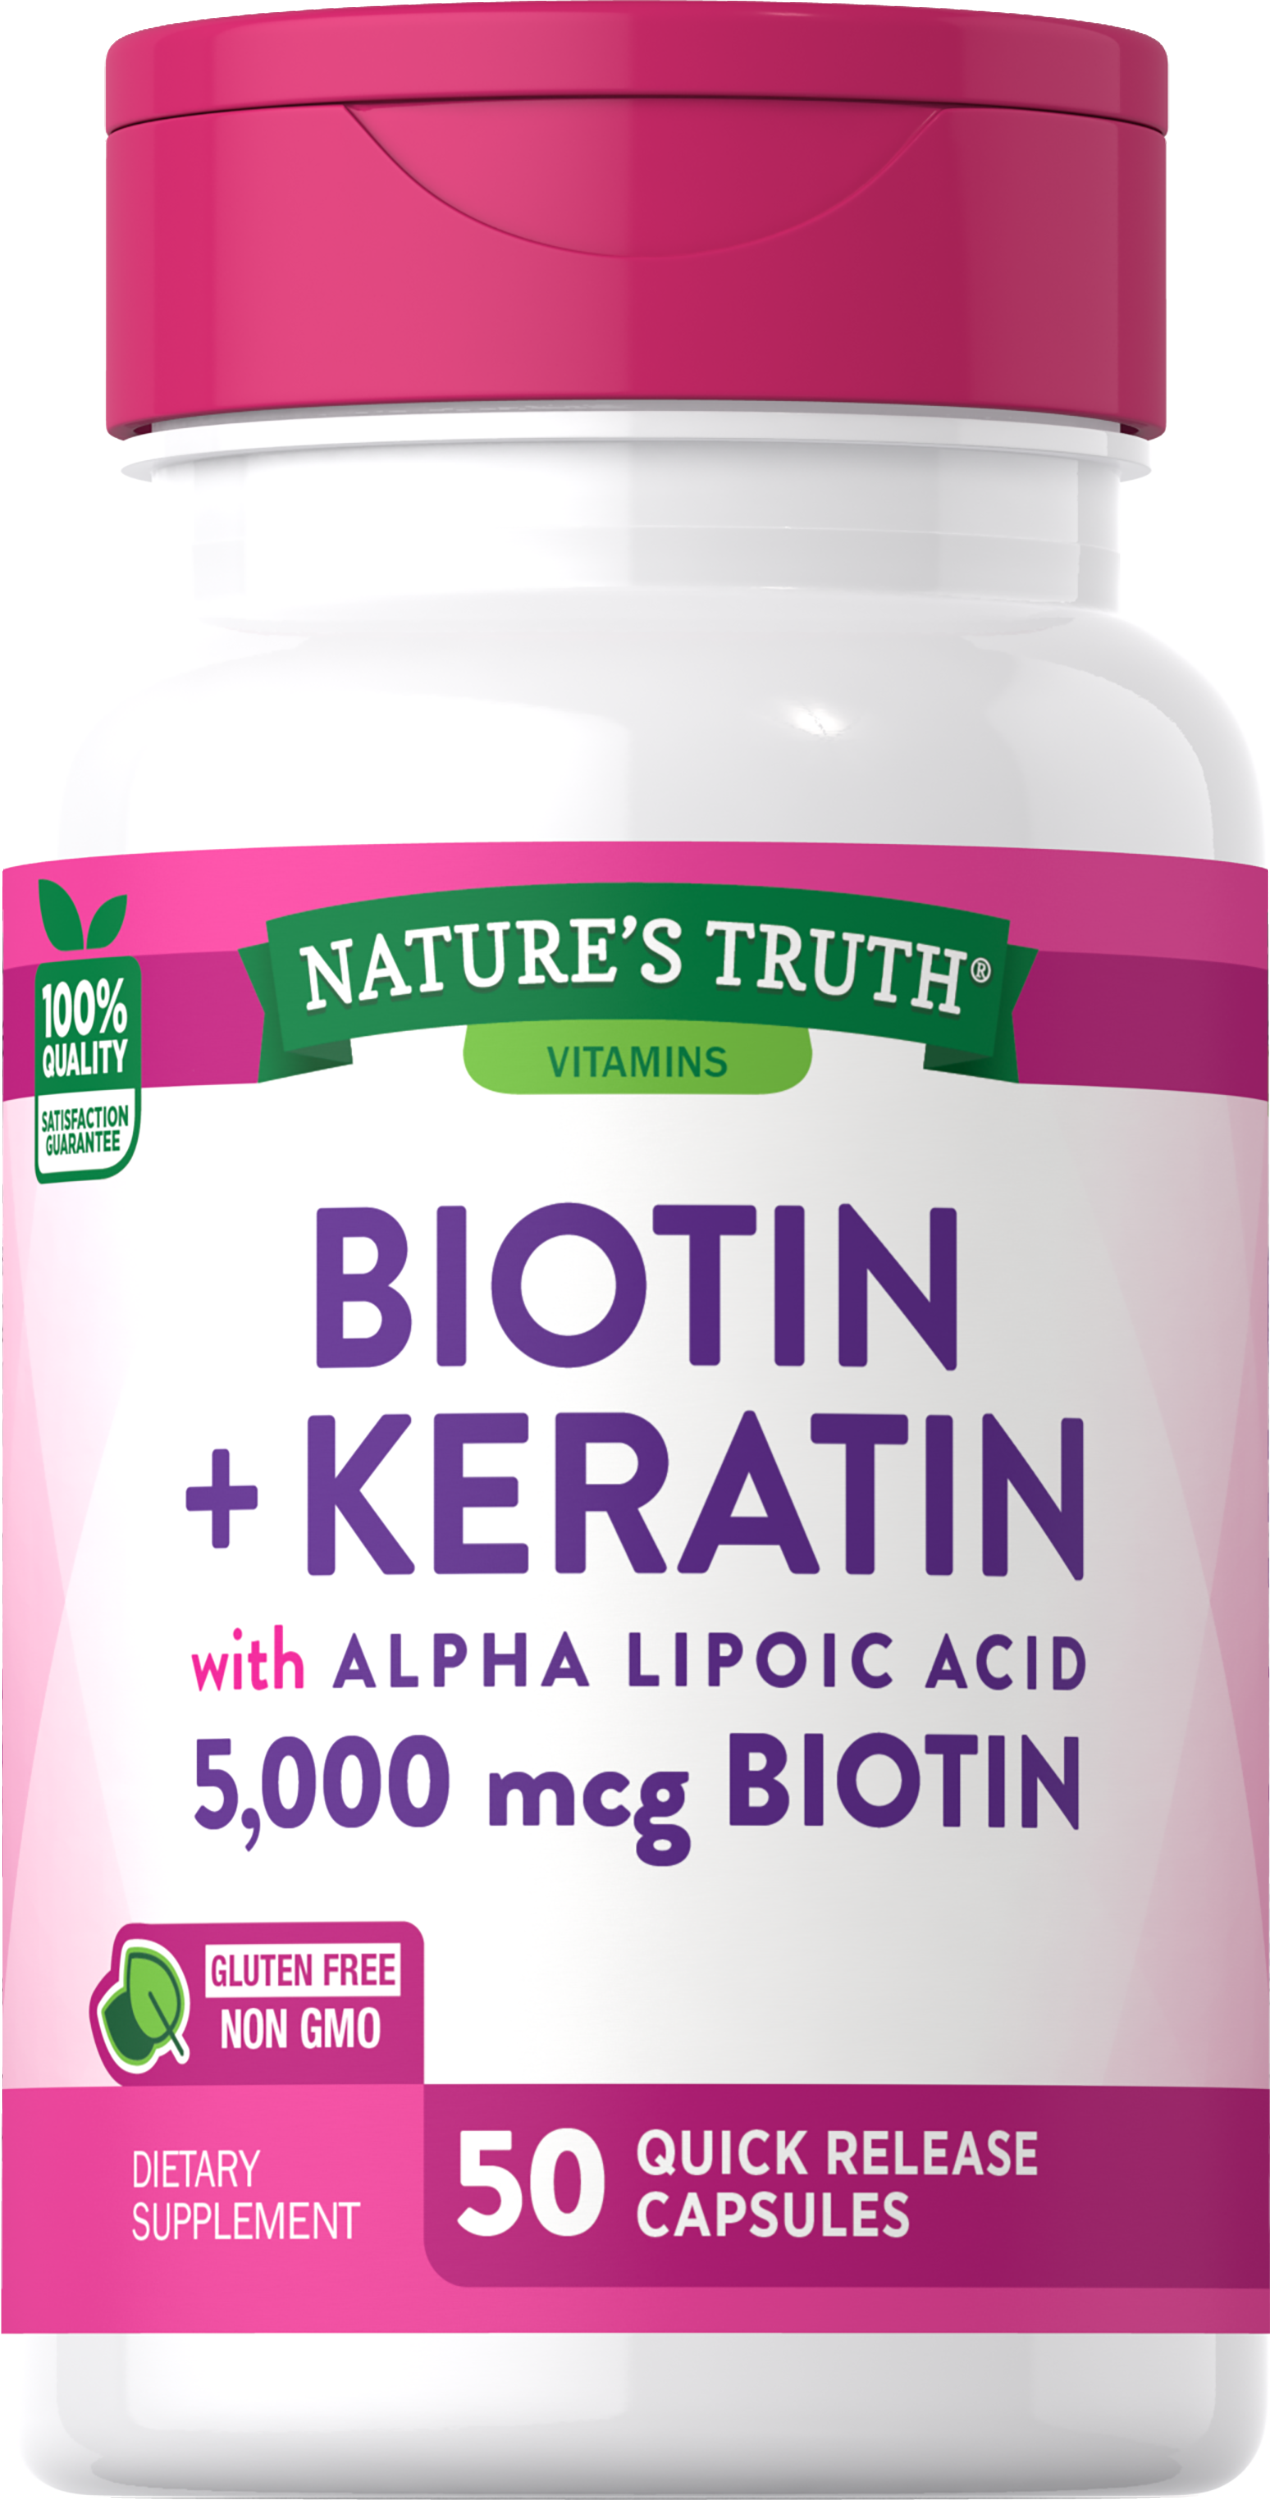  Alpha Lipoic Acid 600mg, 240 Capsules, with Biotin Optimizer, Non-GMO and Gluten Free Supplement